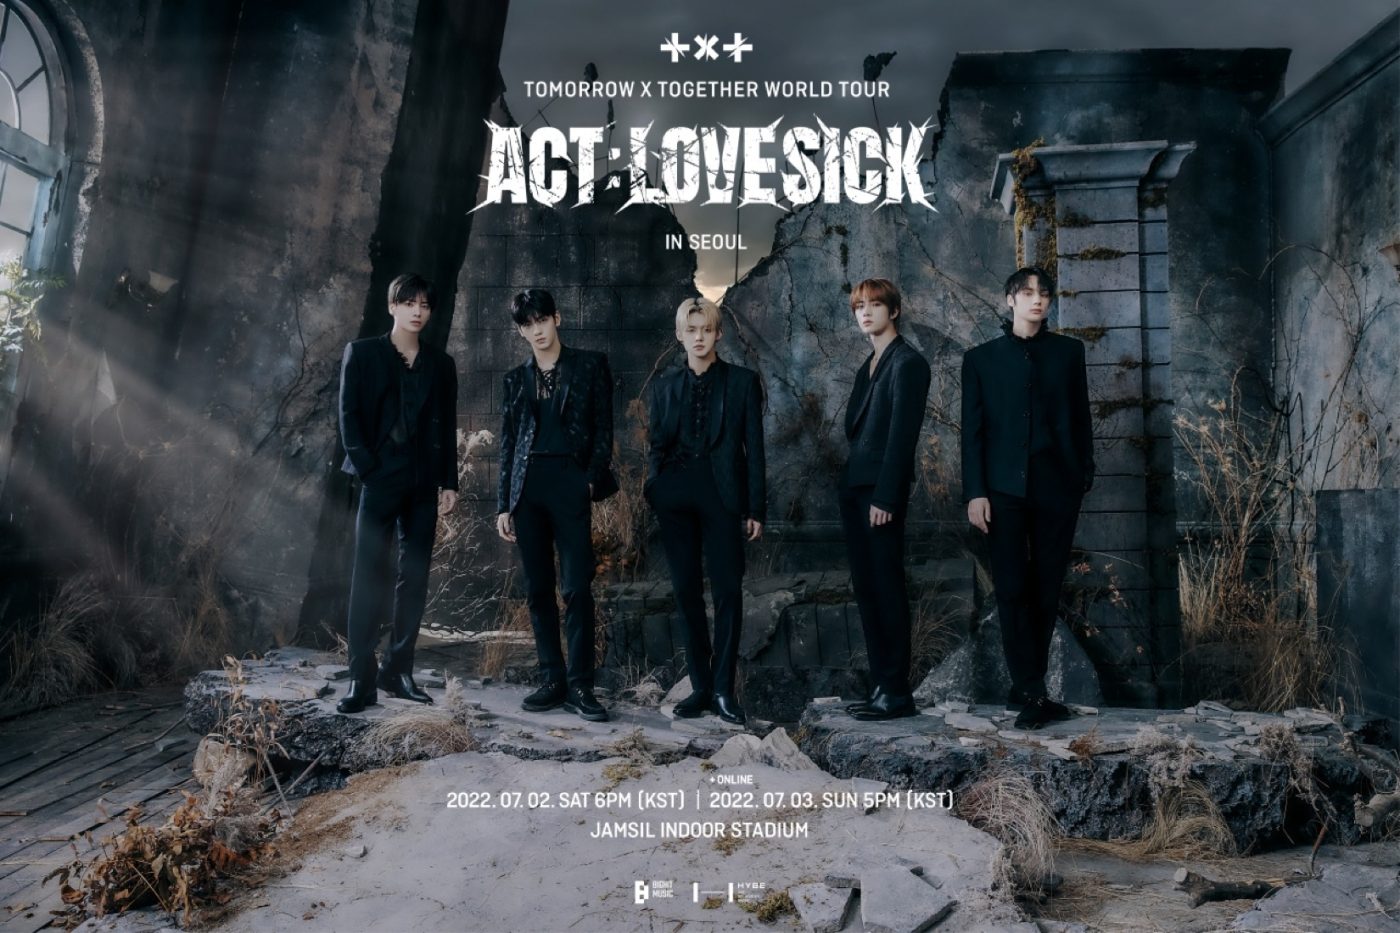 TOMORROW X TOGETHER、初ワールドツアー『ACT : LOVE SICK』を開催 - 画像一覧（1/1）